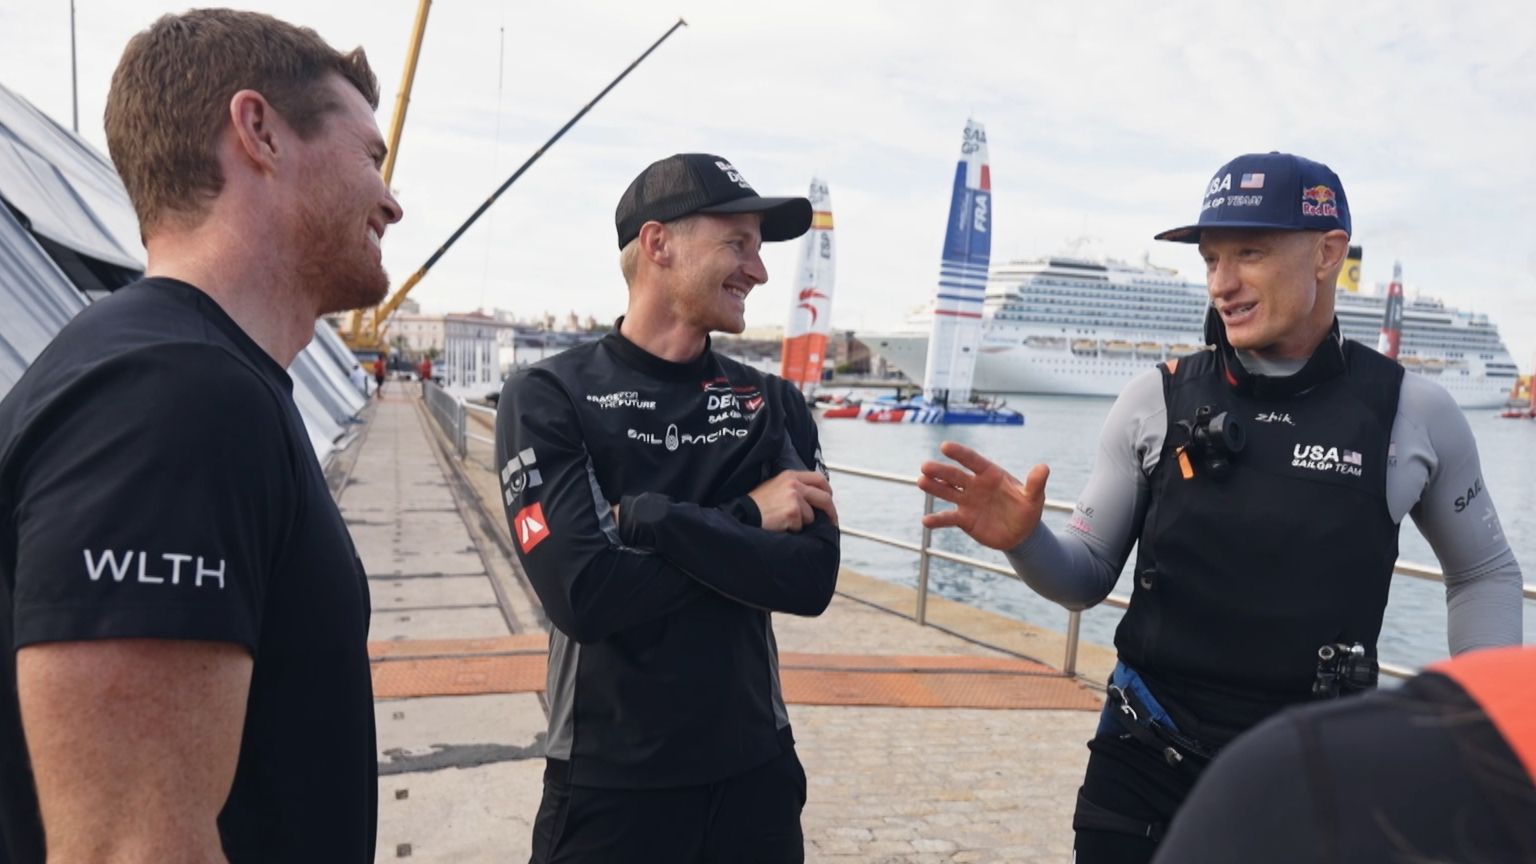 EXCLUSIVE: Aussie double agent Jimmy Spithill to lead Team Australia at Dubai Sail Grand Prix after latest shift